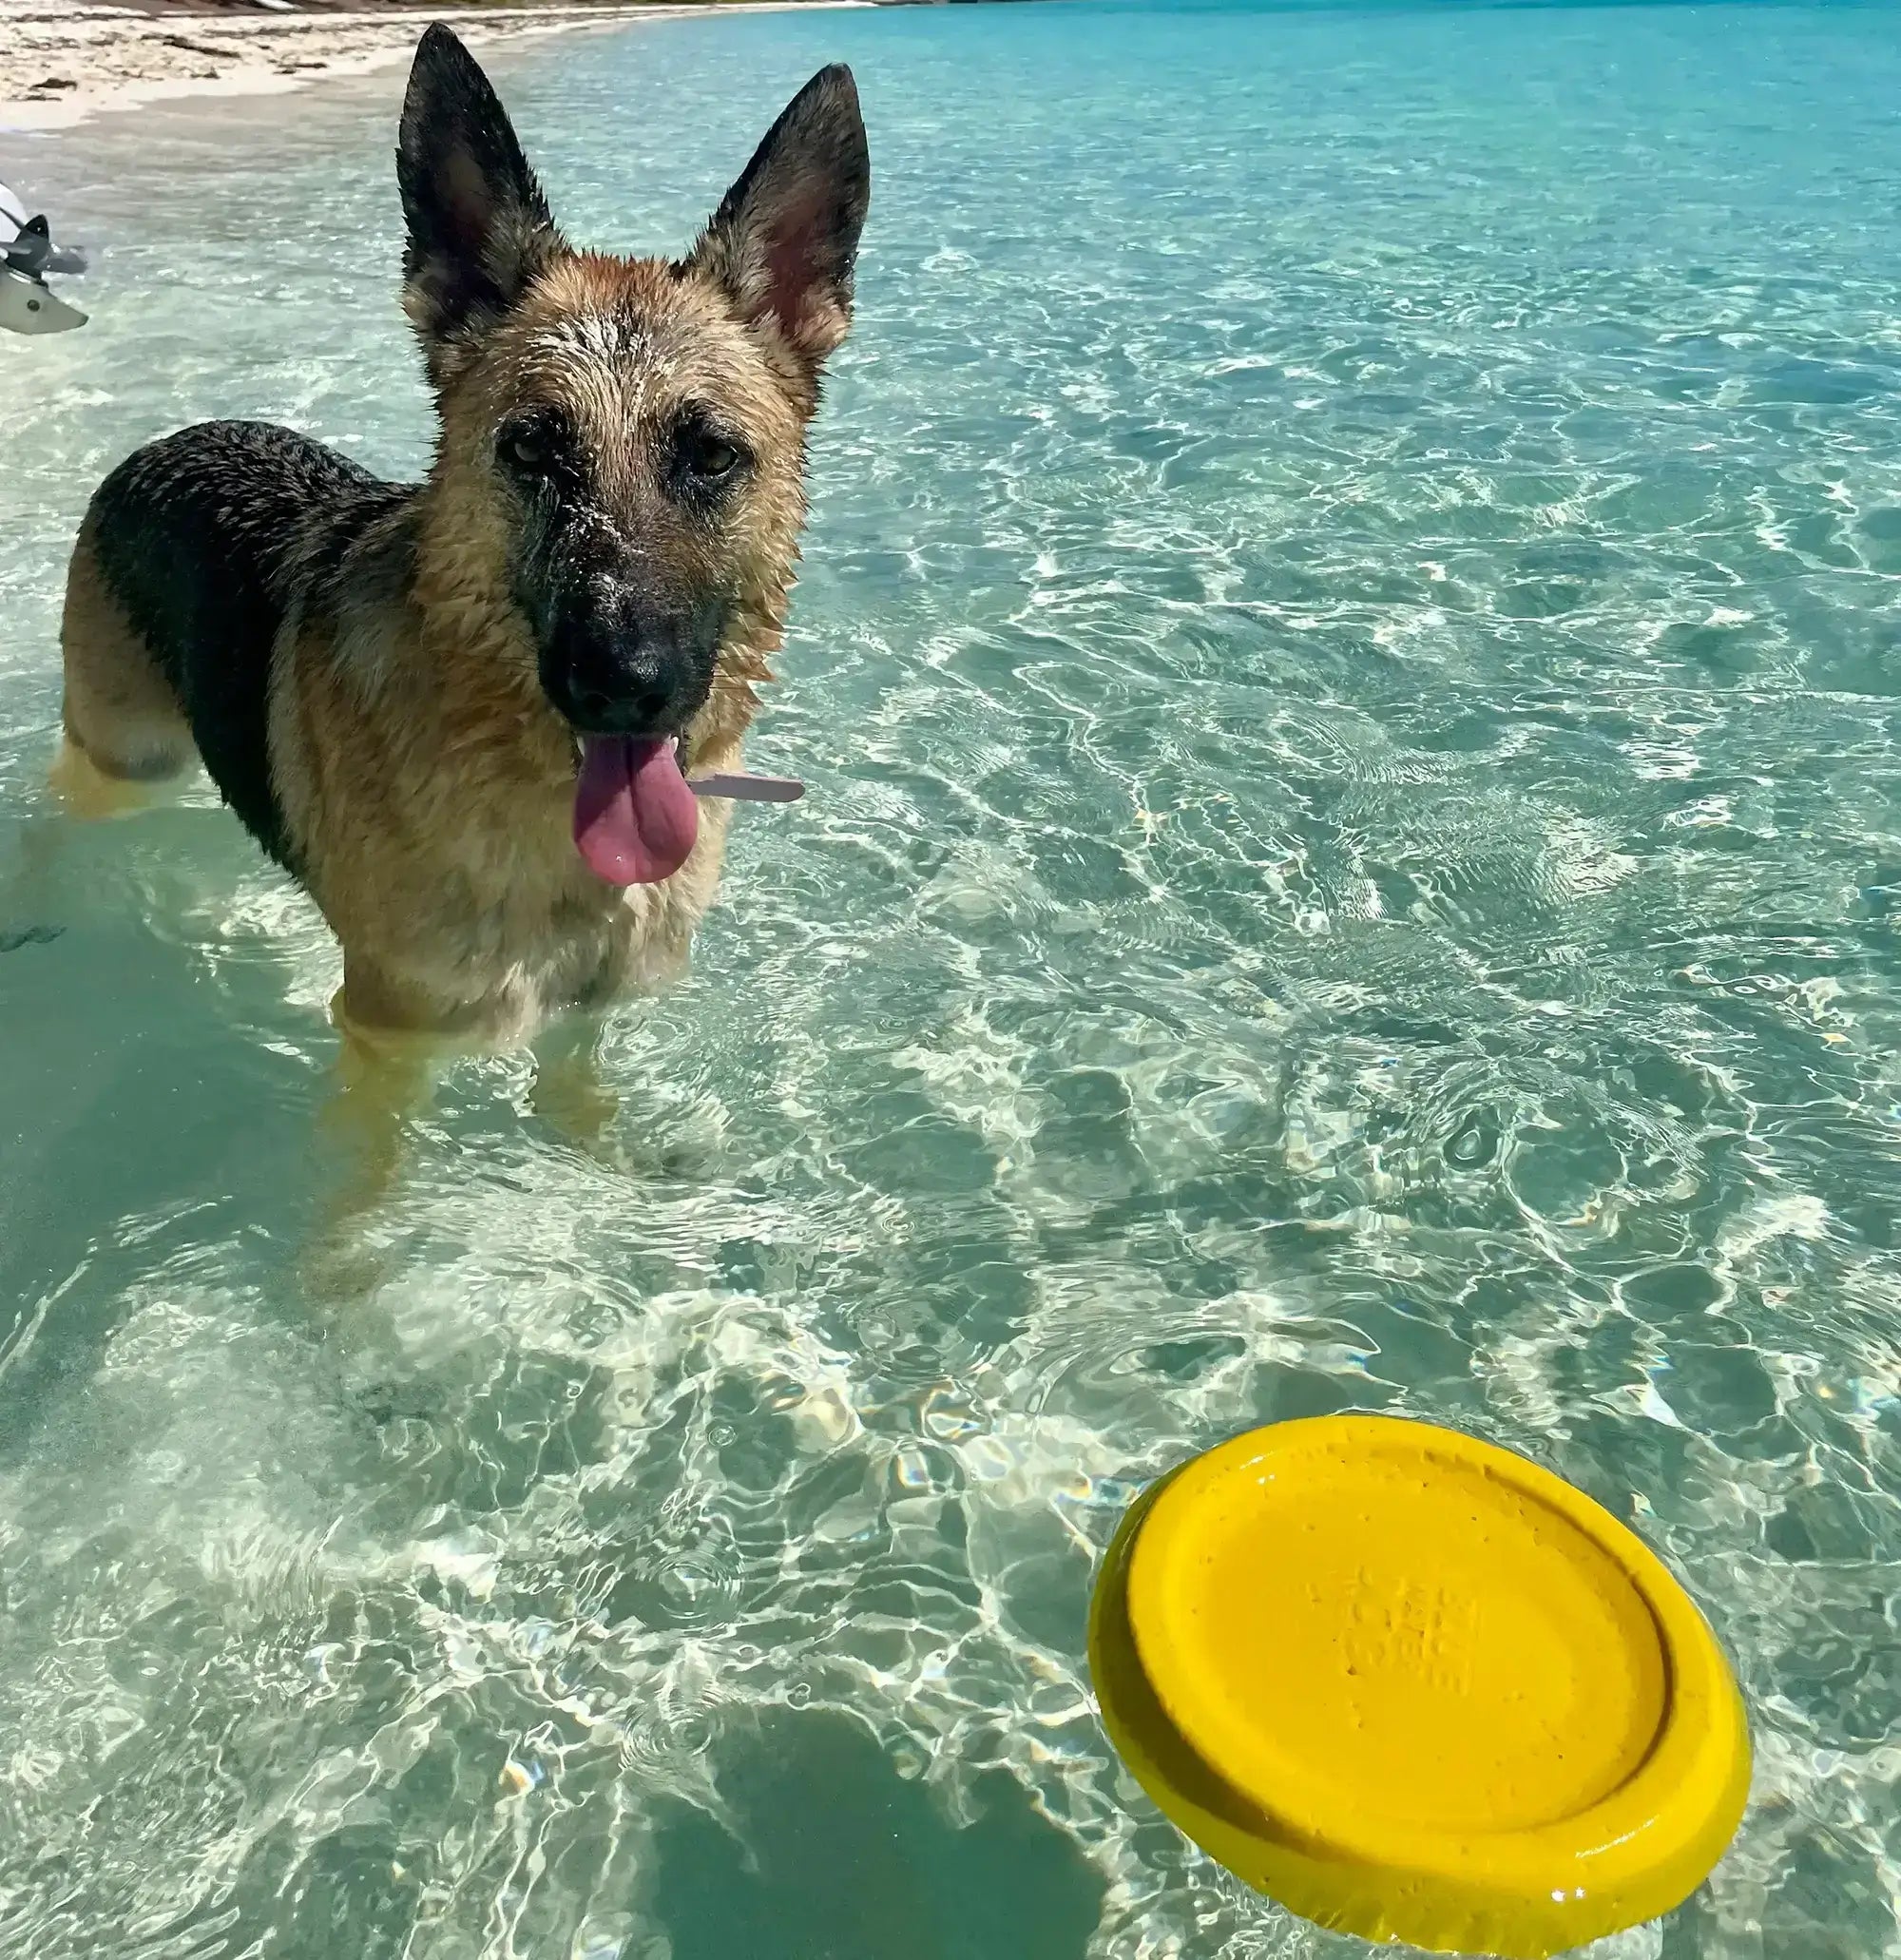 Yellow dog frisbee floating in the ocean with a German Shepherd.